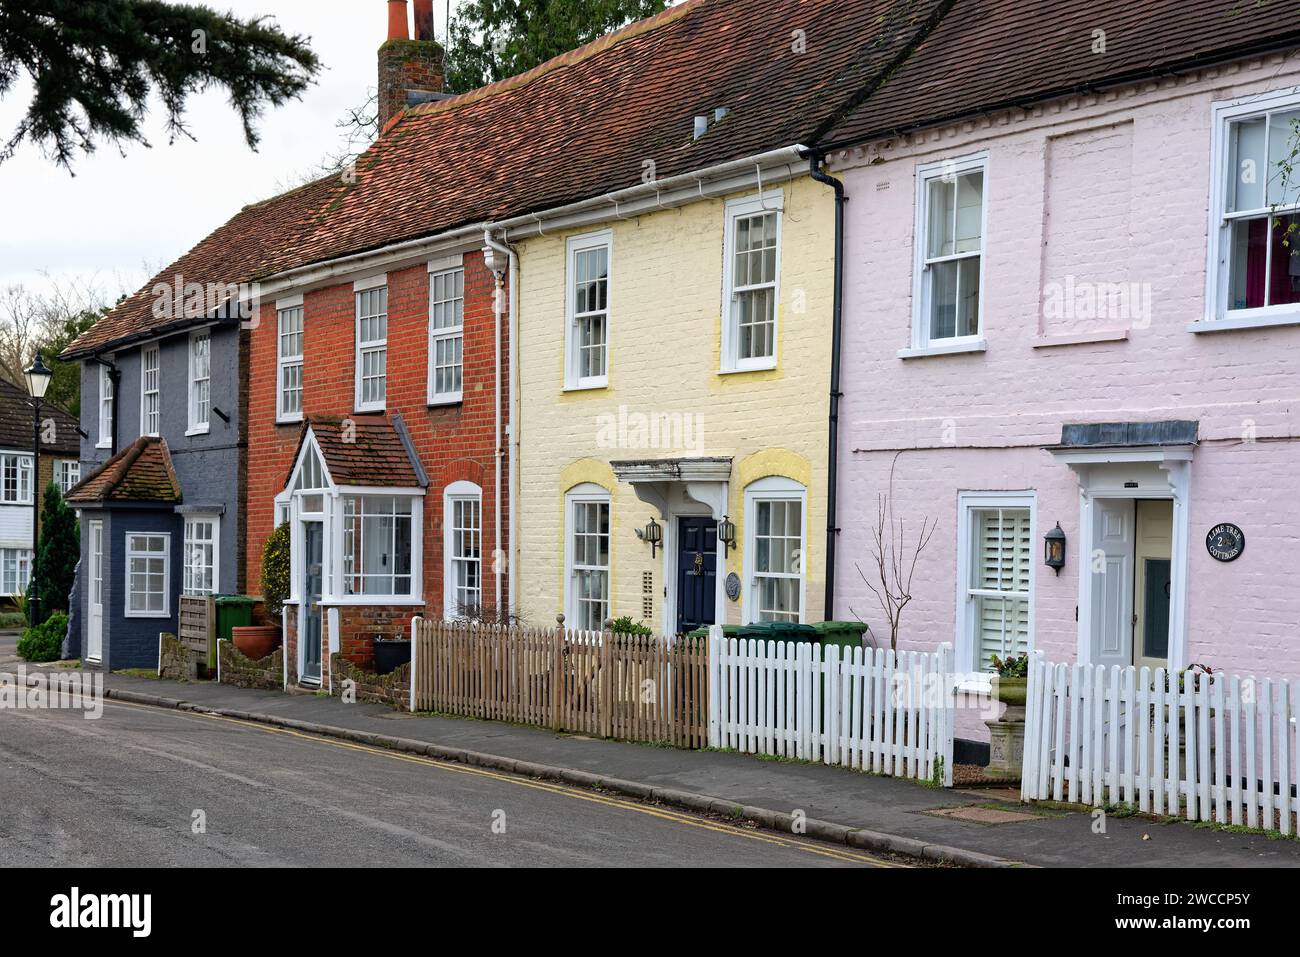 Exteriors of old and attractive terraced cottages painted in pastels colours in Church Road, old Shepperton Surrey England UK Stock Photo